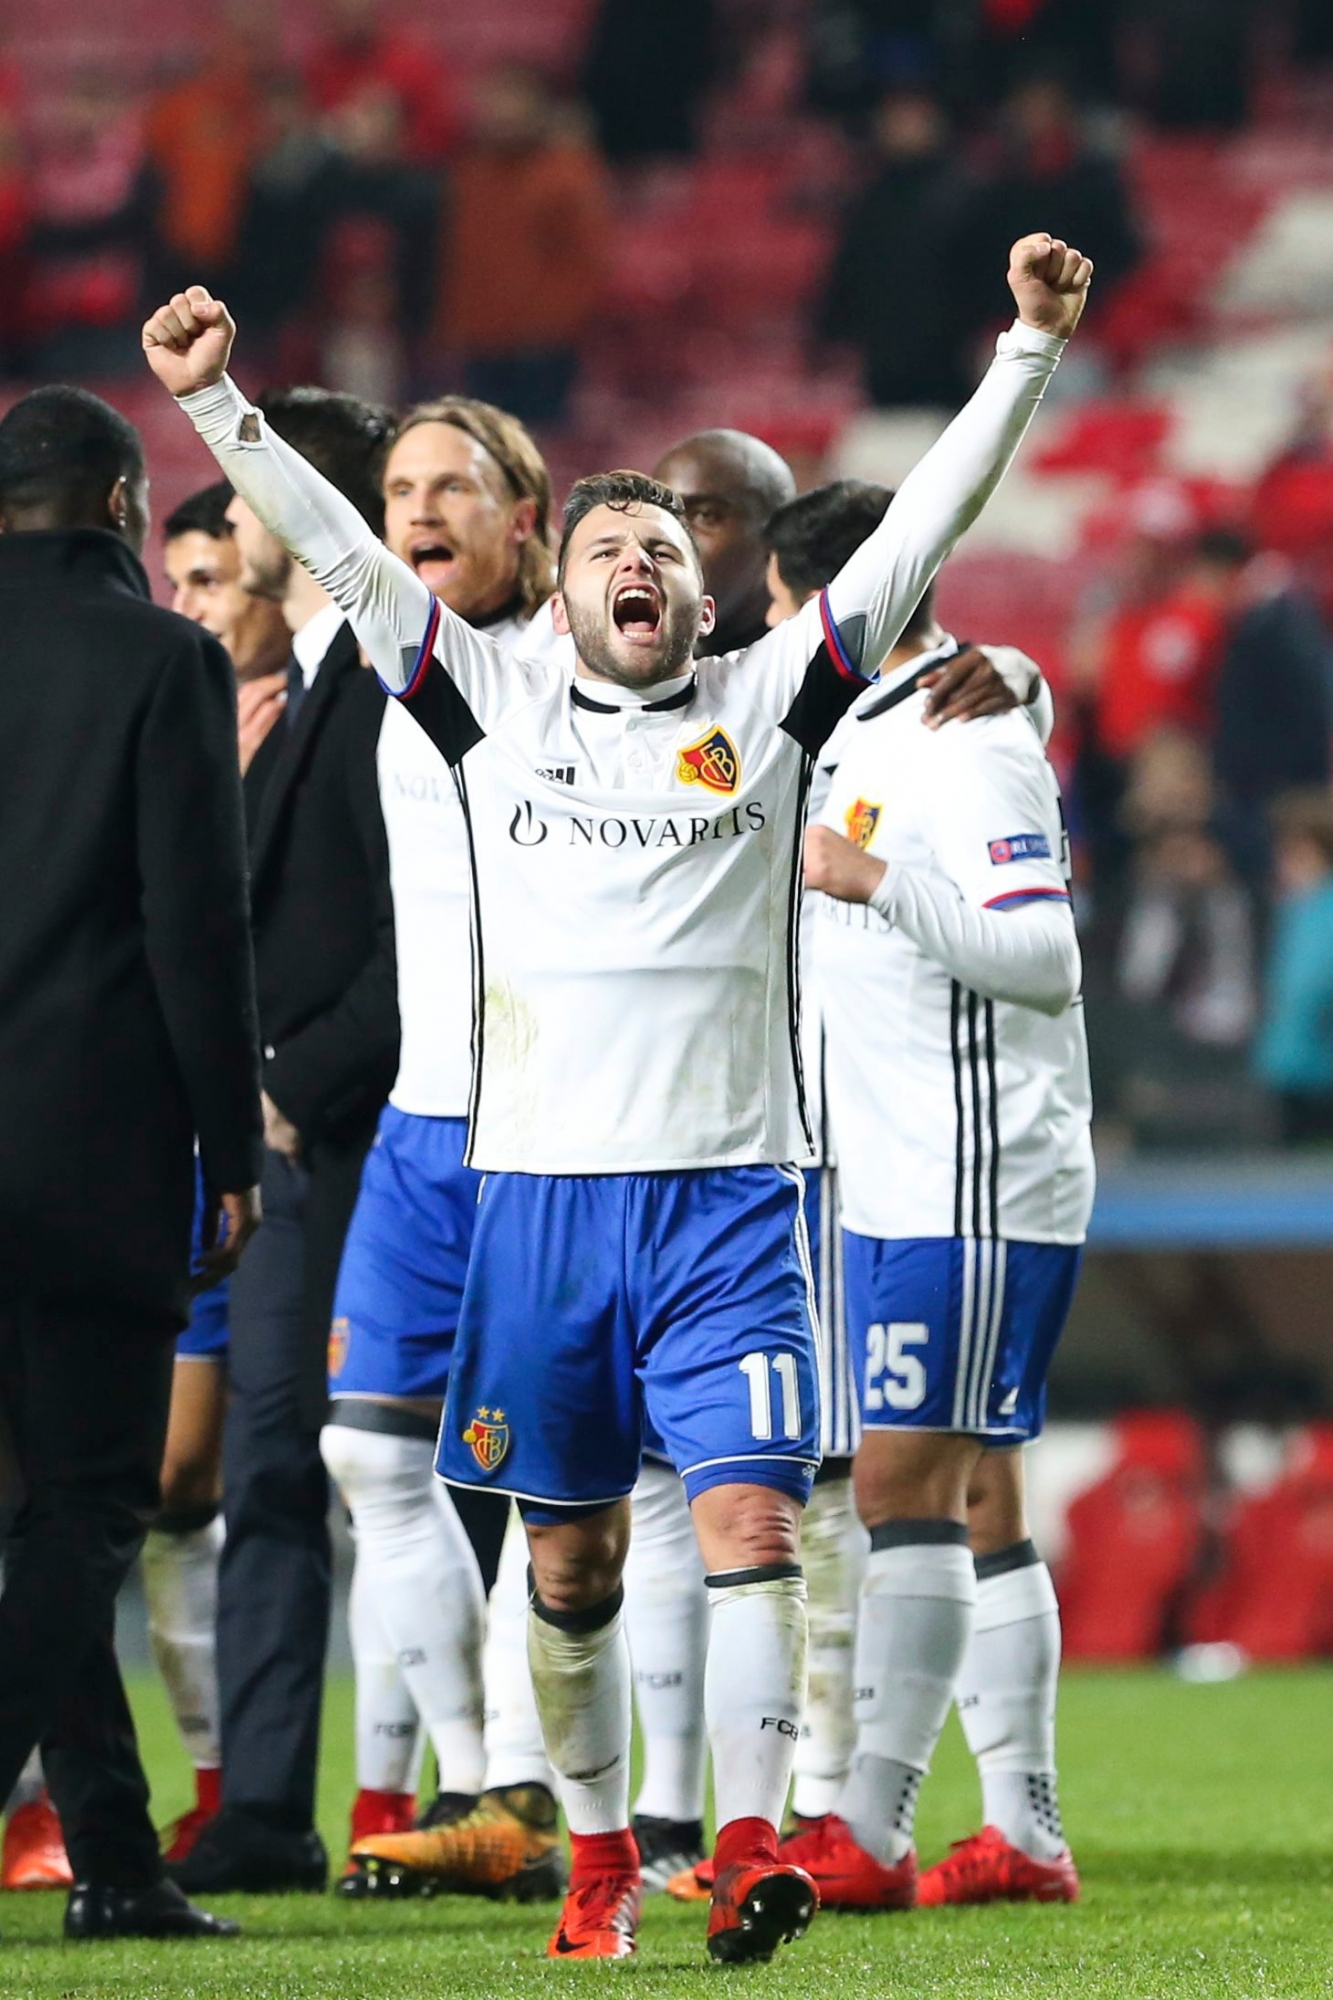 Basel's Renato Steffen, center, celebrates with teammates after the 0-2 win in the Champions League group A soccer match between SL Benfica and FC Basel at the Luz stadium in Lisbon, Tuesday, Dec. 5, 2017. (AP Photo/Armando Franca) Portugal Soccer Champions League